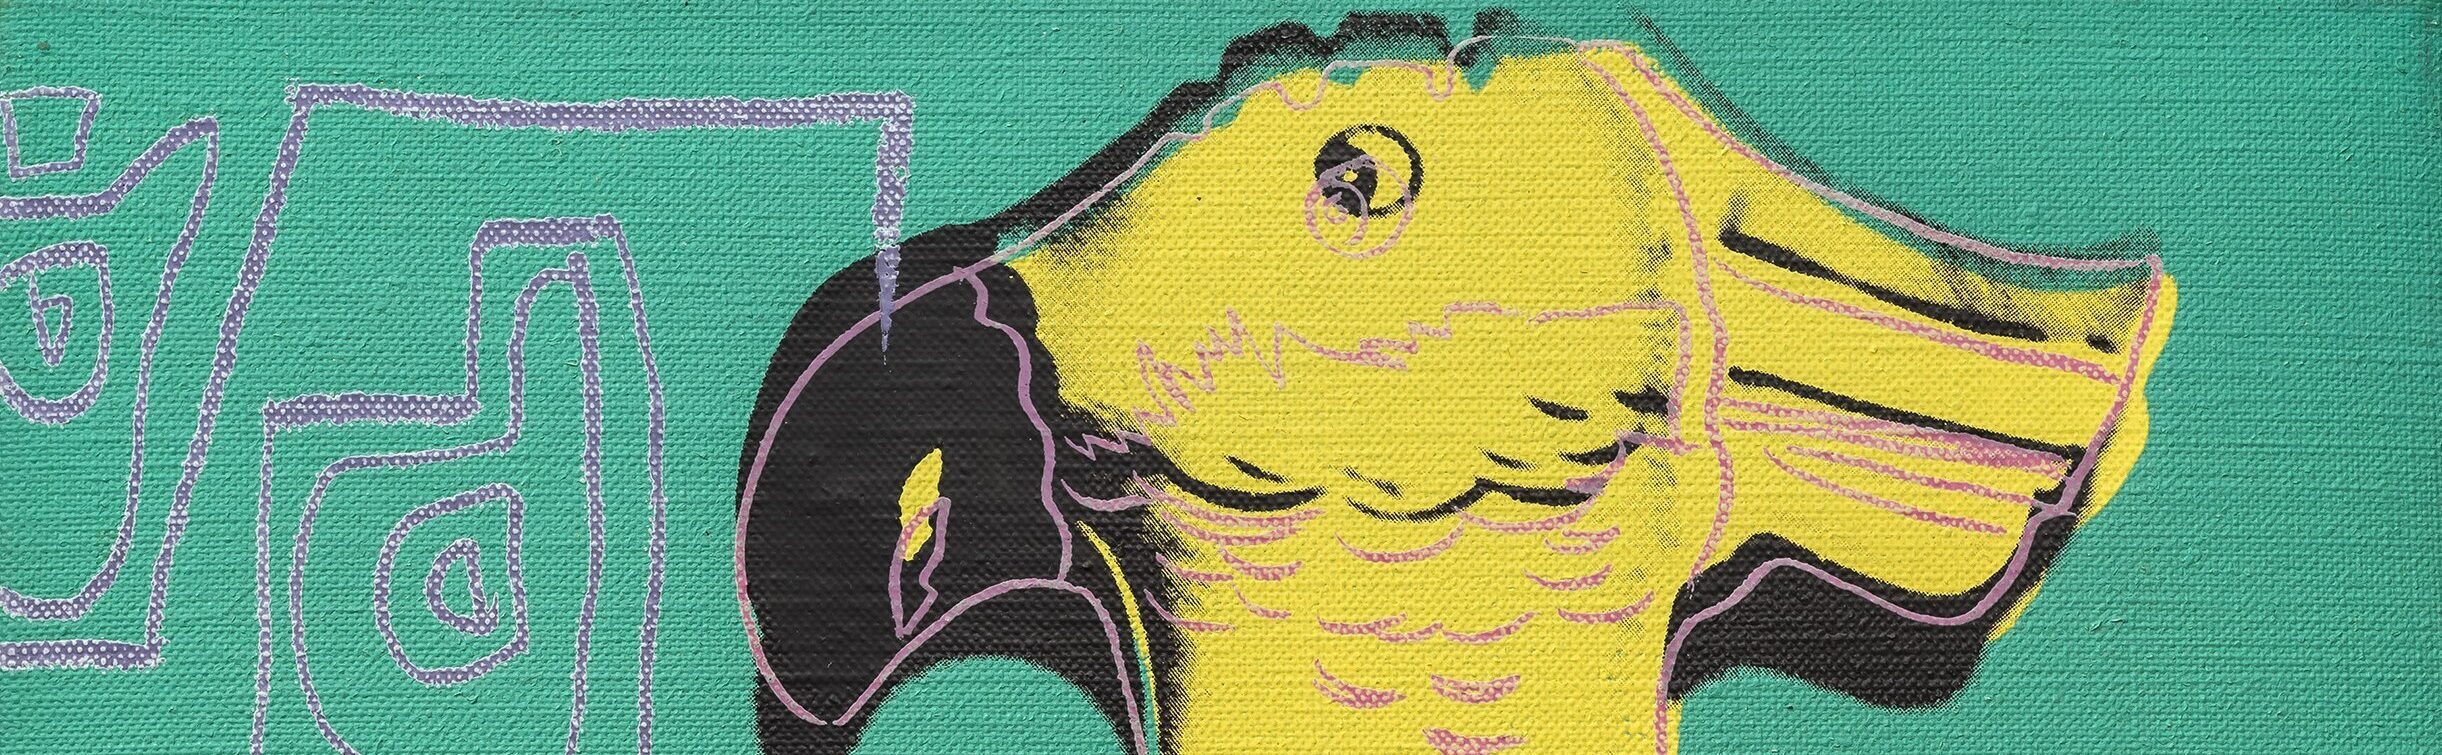 Andy Warhol Toy Painting Parrot